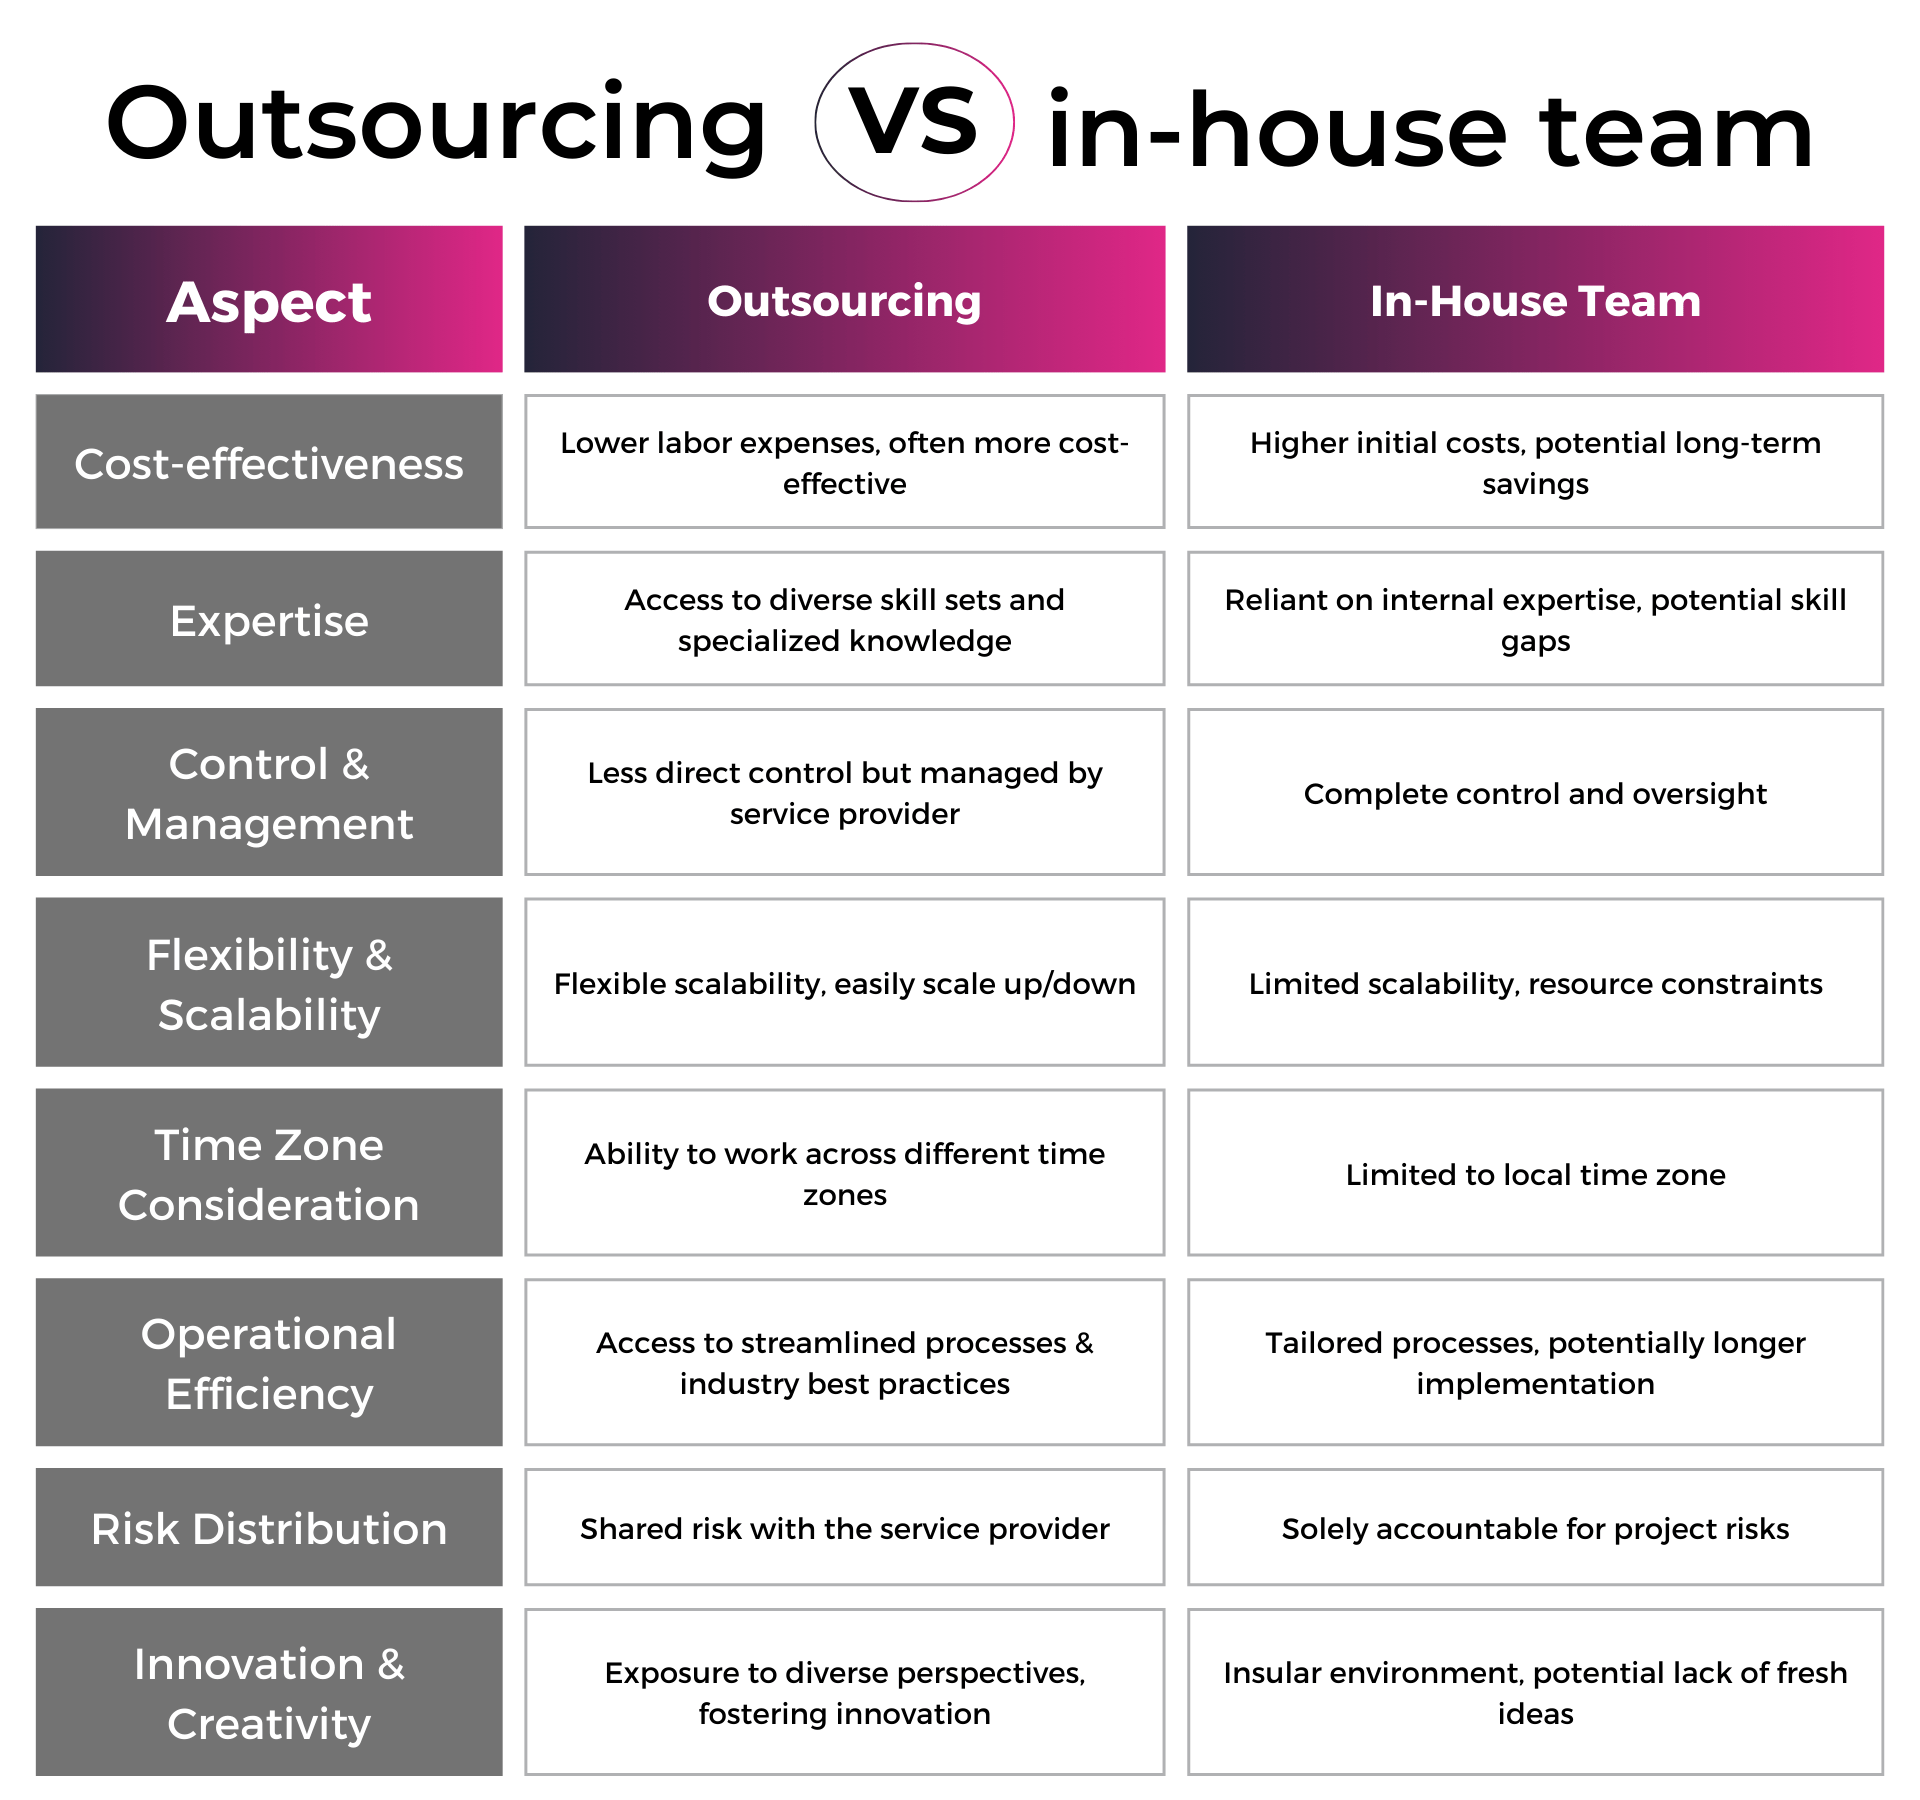 Outsourcing VS in-house team